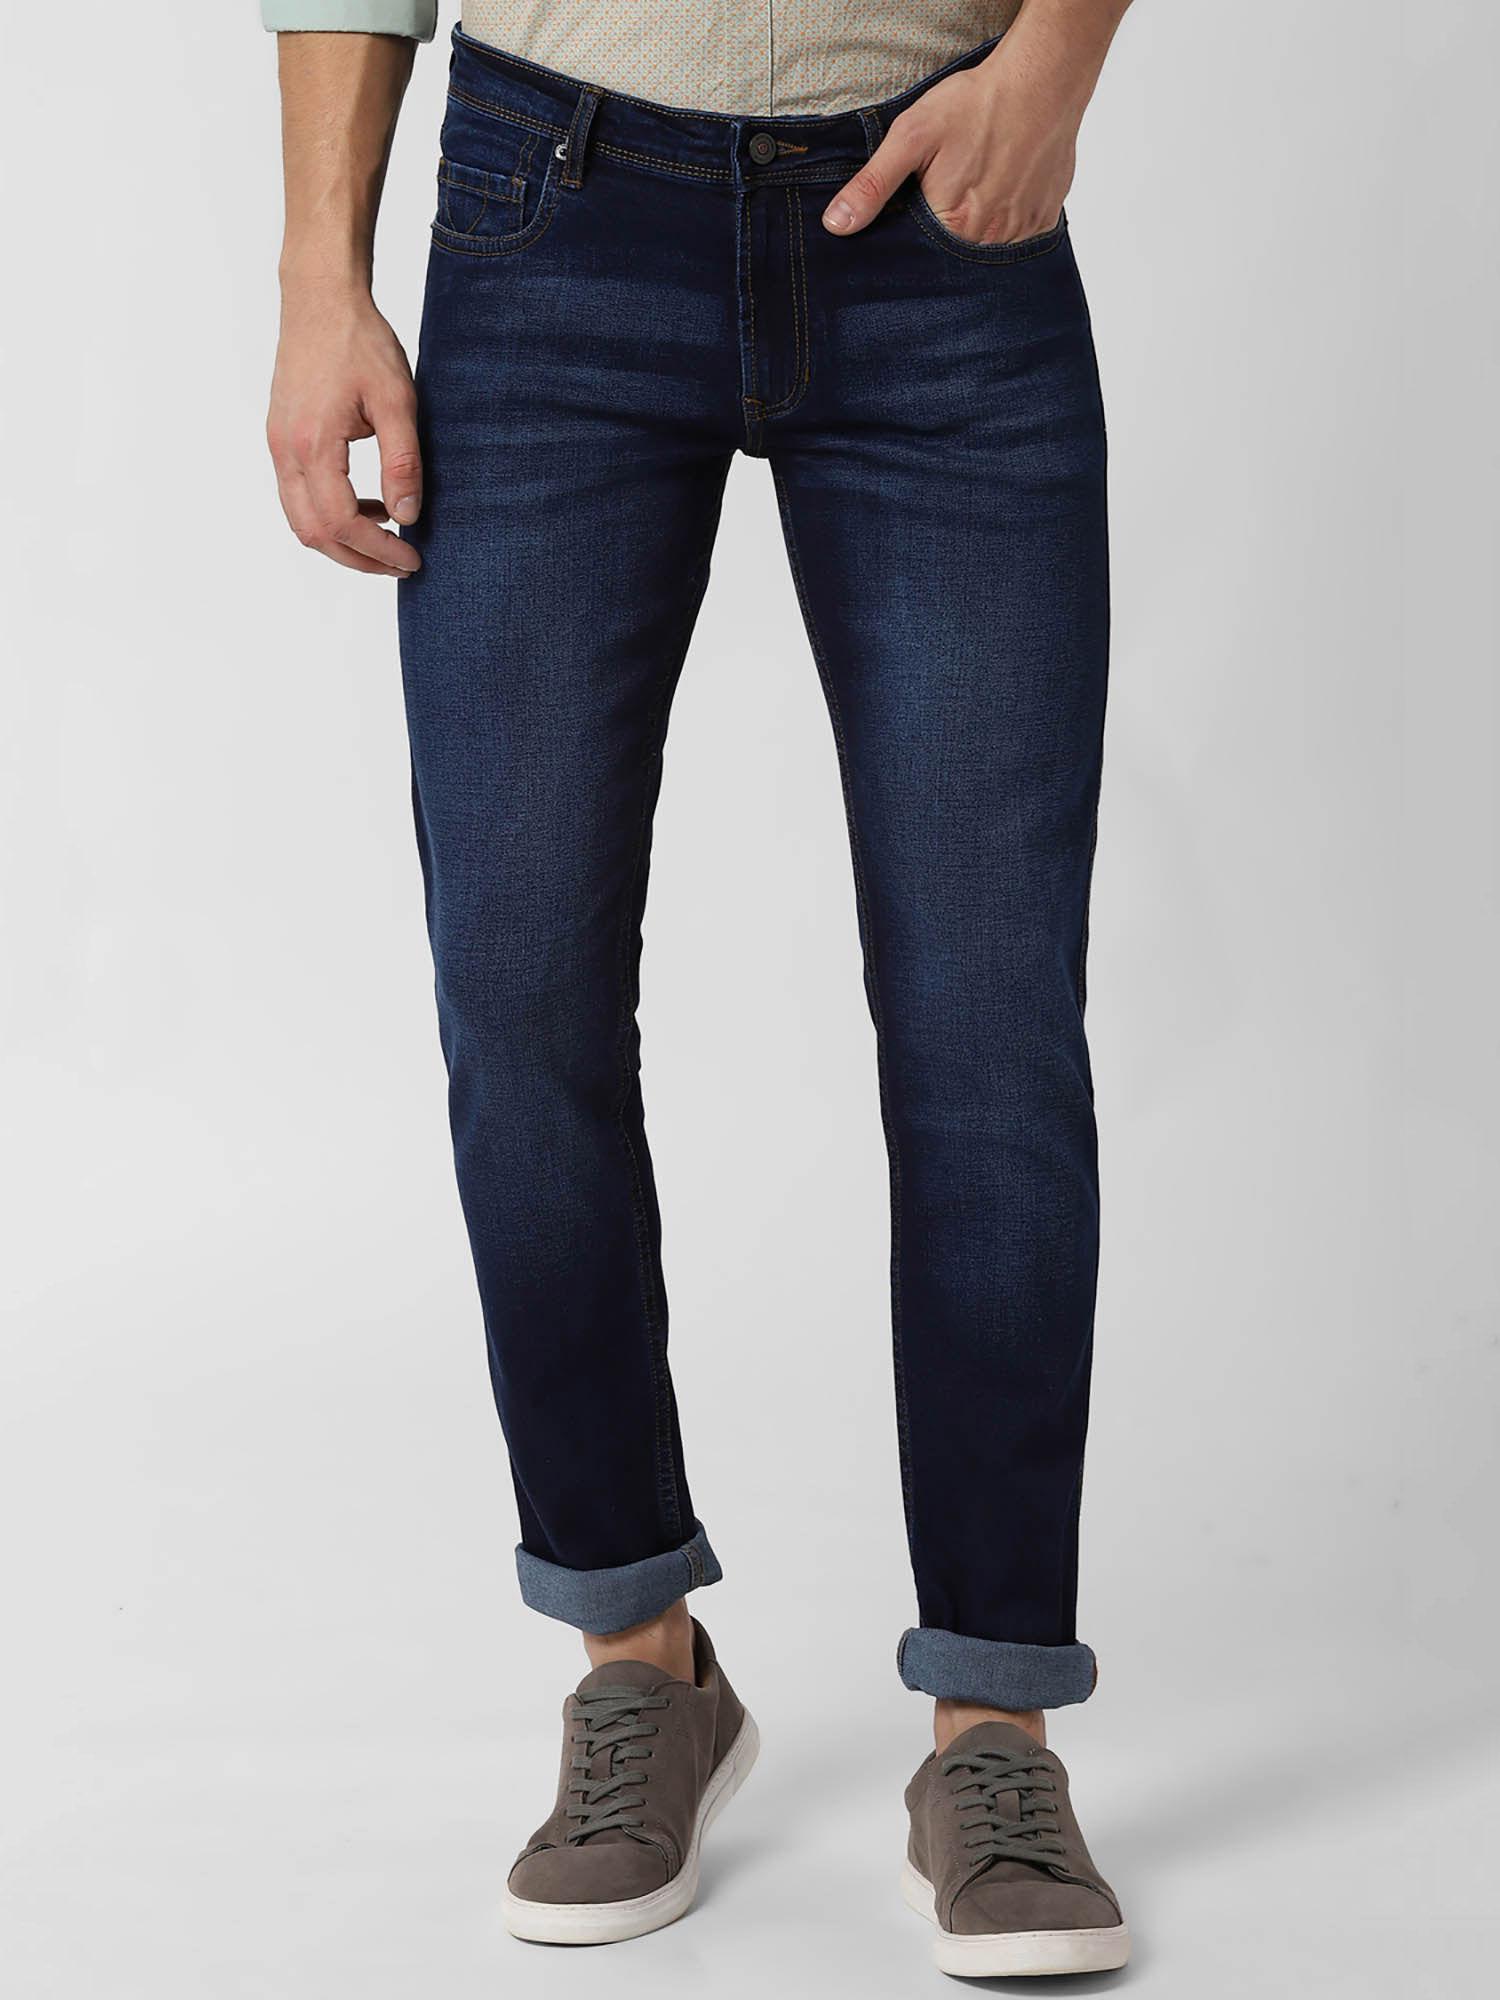 navy blue solid jeans